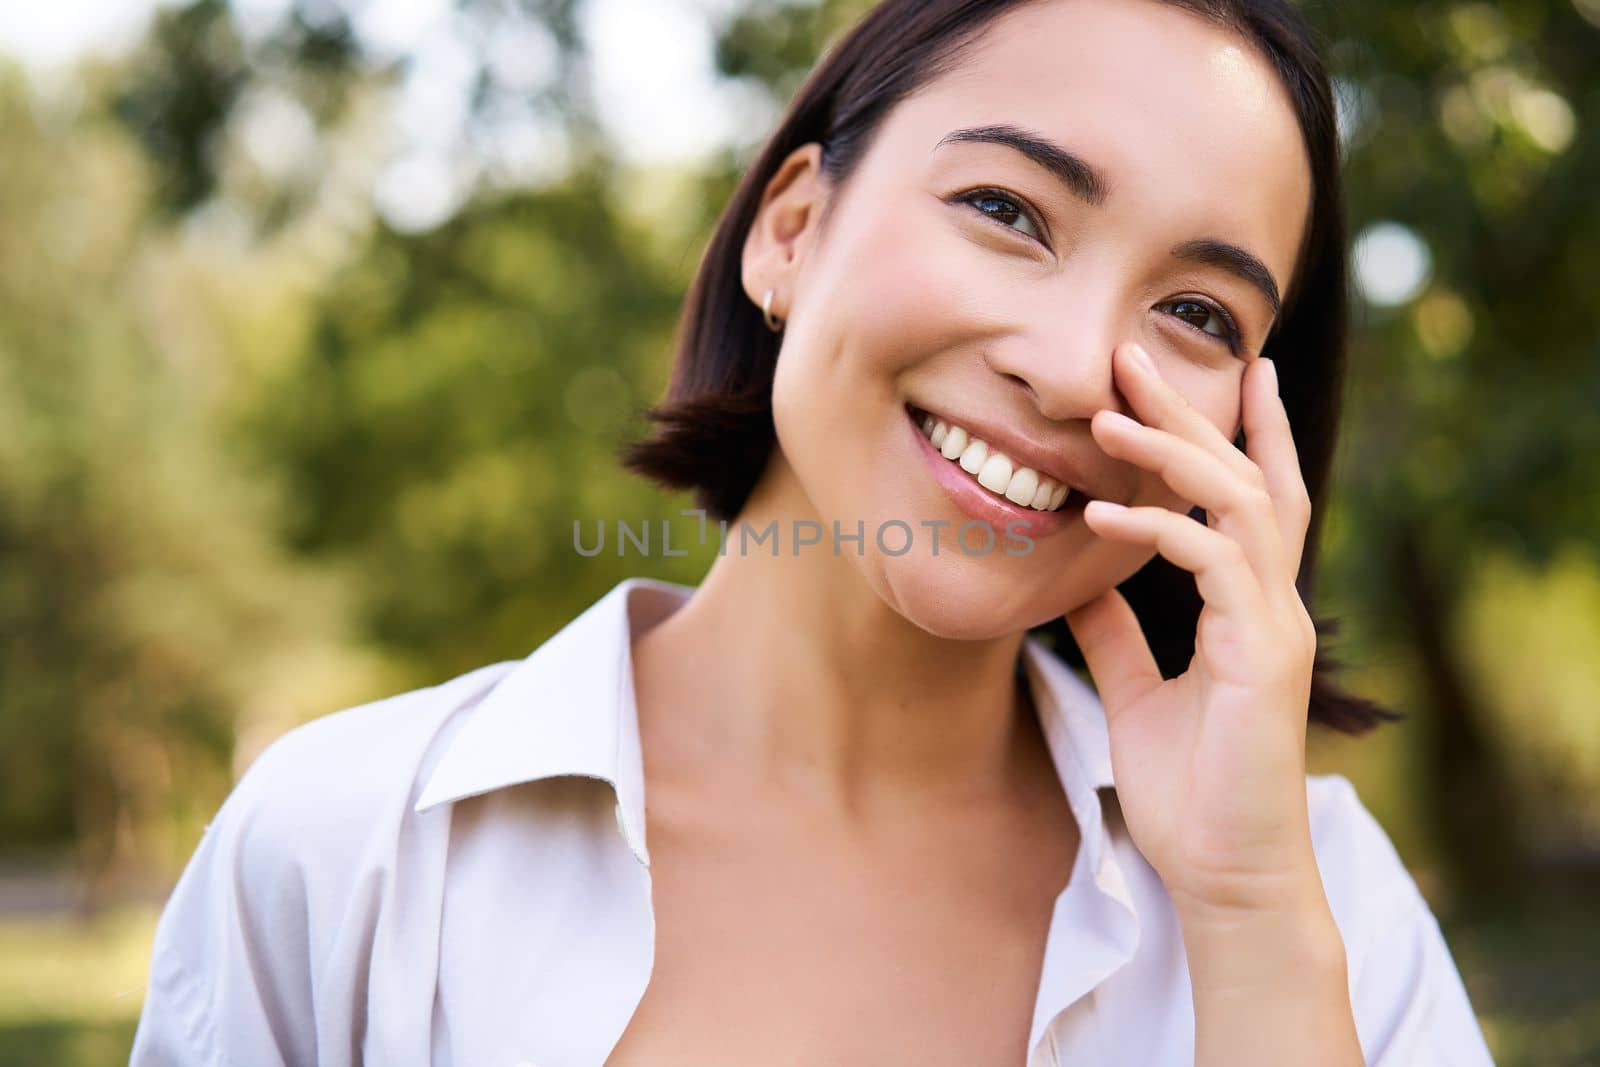 Portrait of young asian woman, laughing and smiling, looking happy while enjoying the walk in park, posing near green trees.